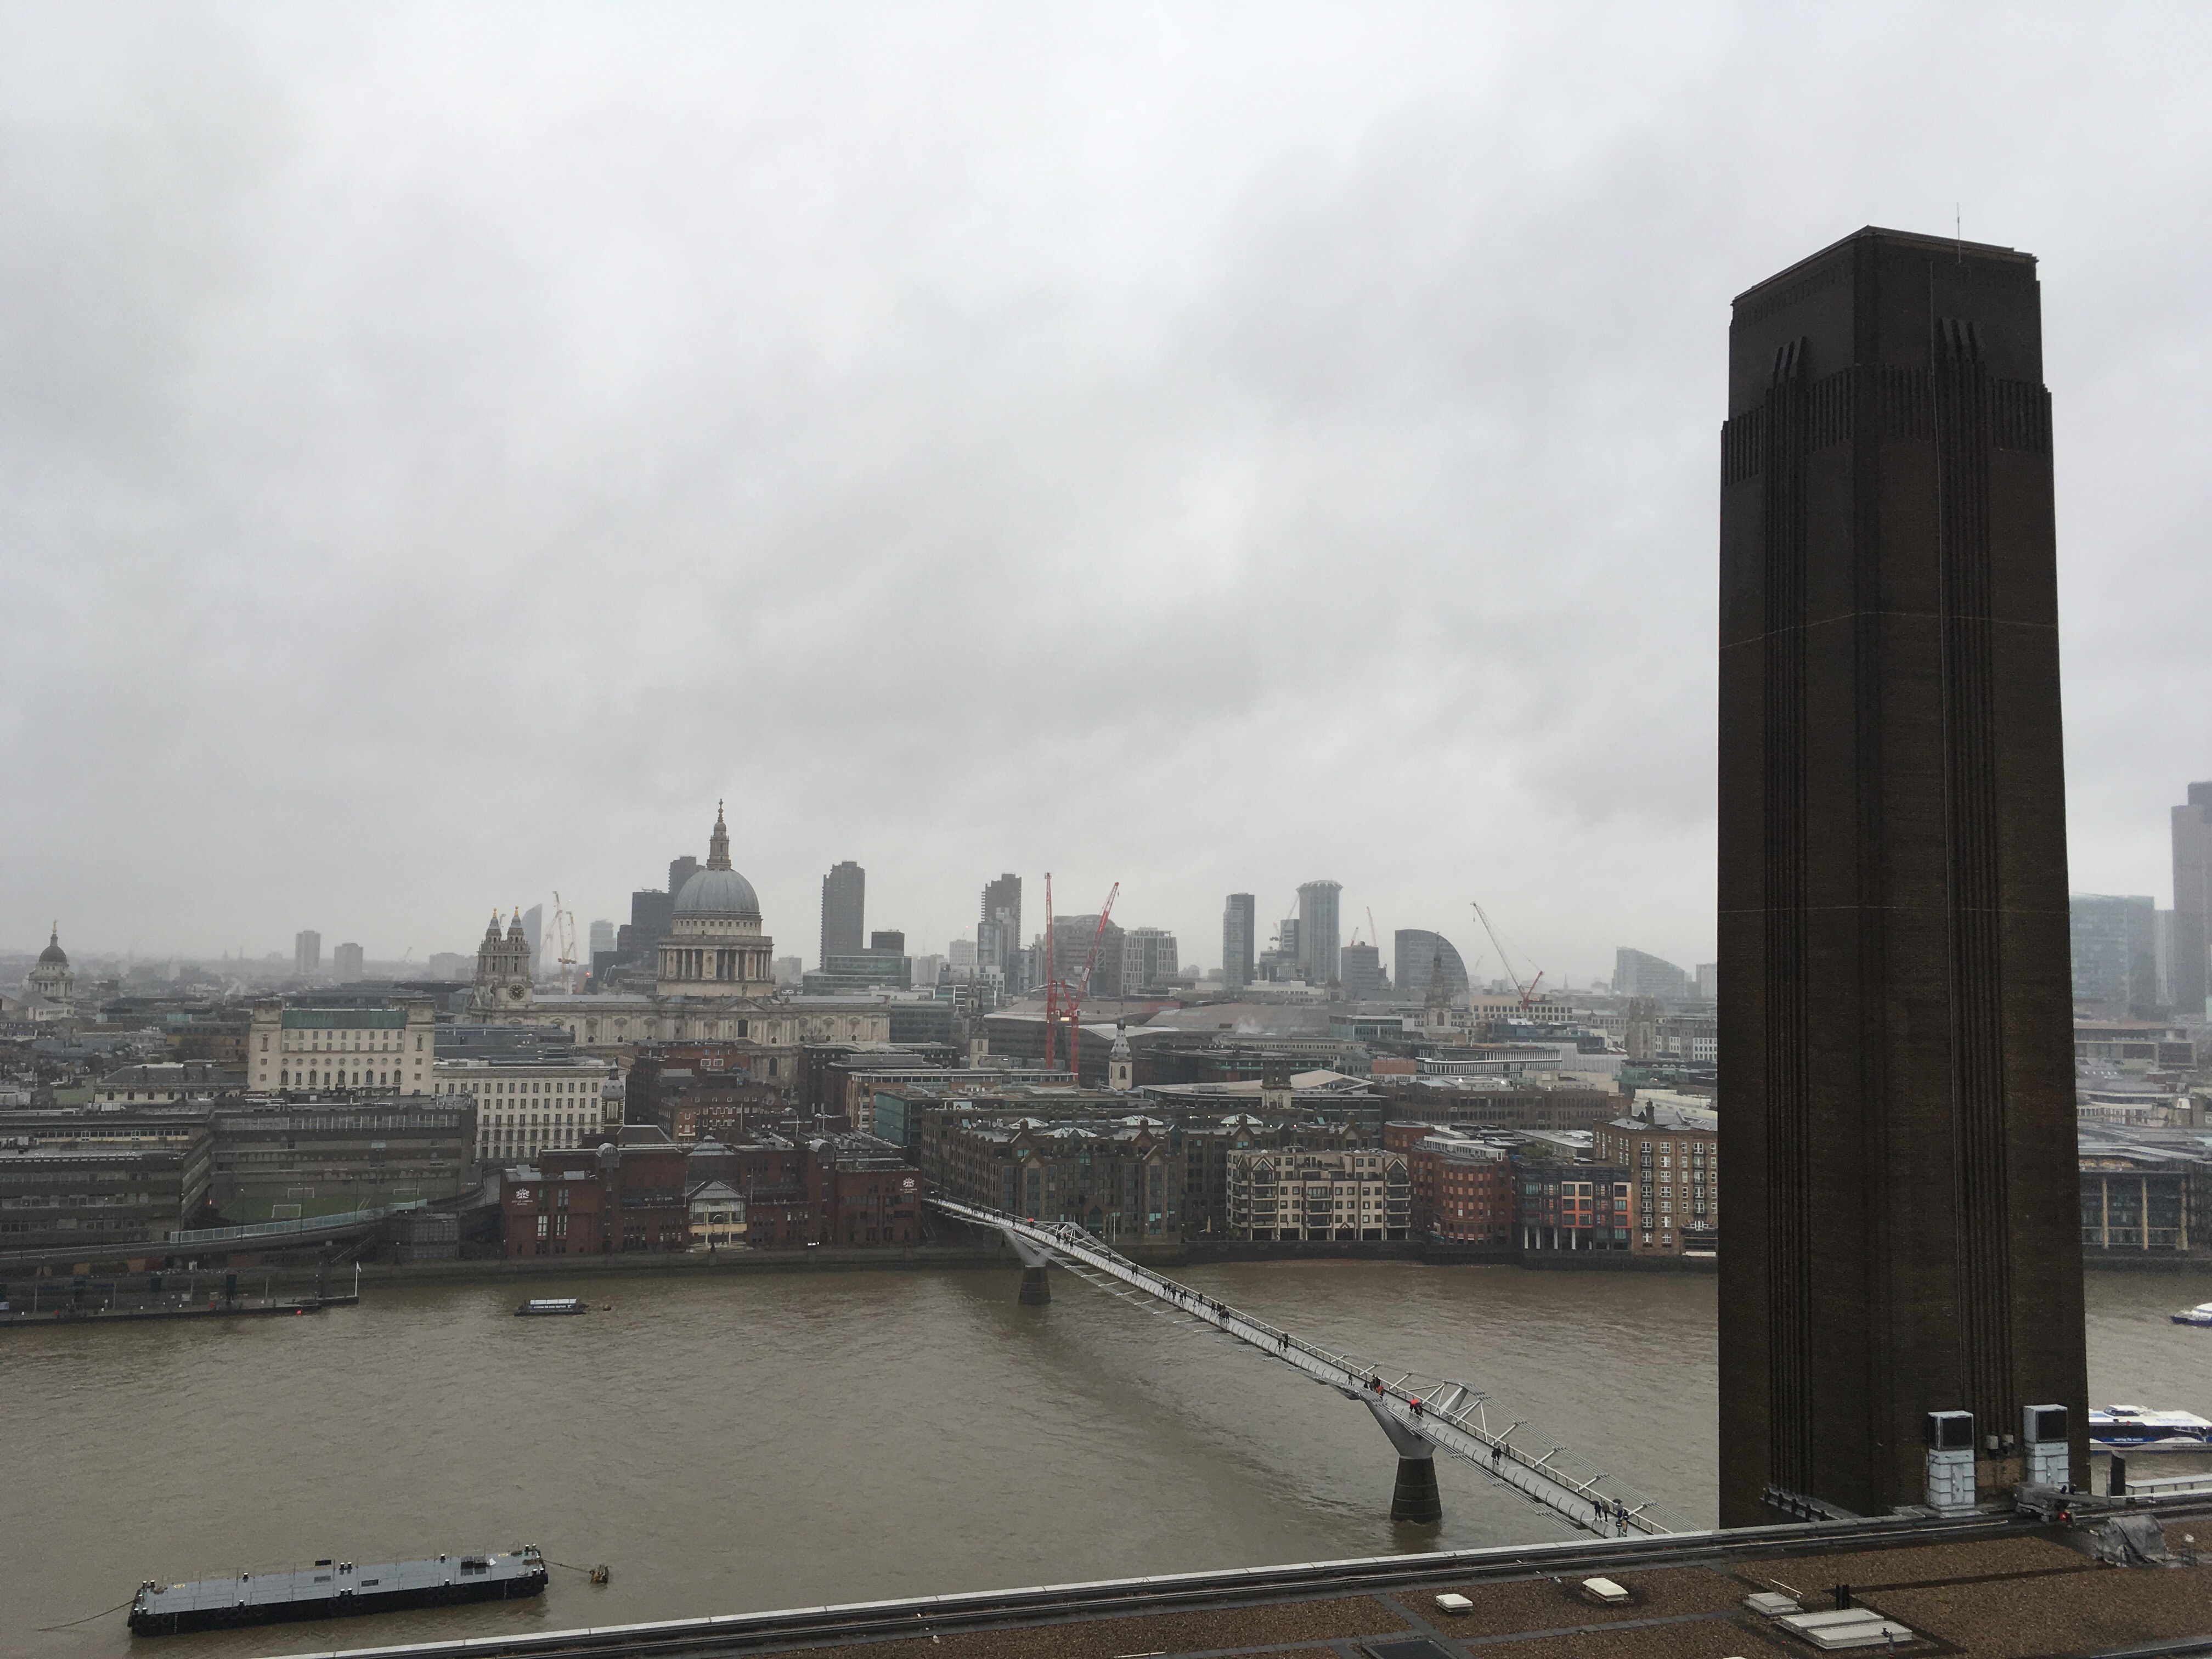 London from the Tate Modern